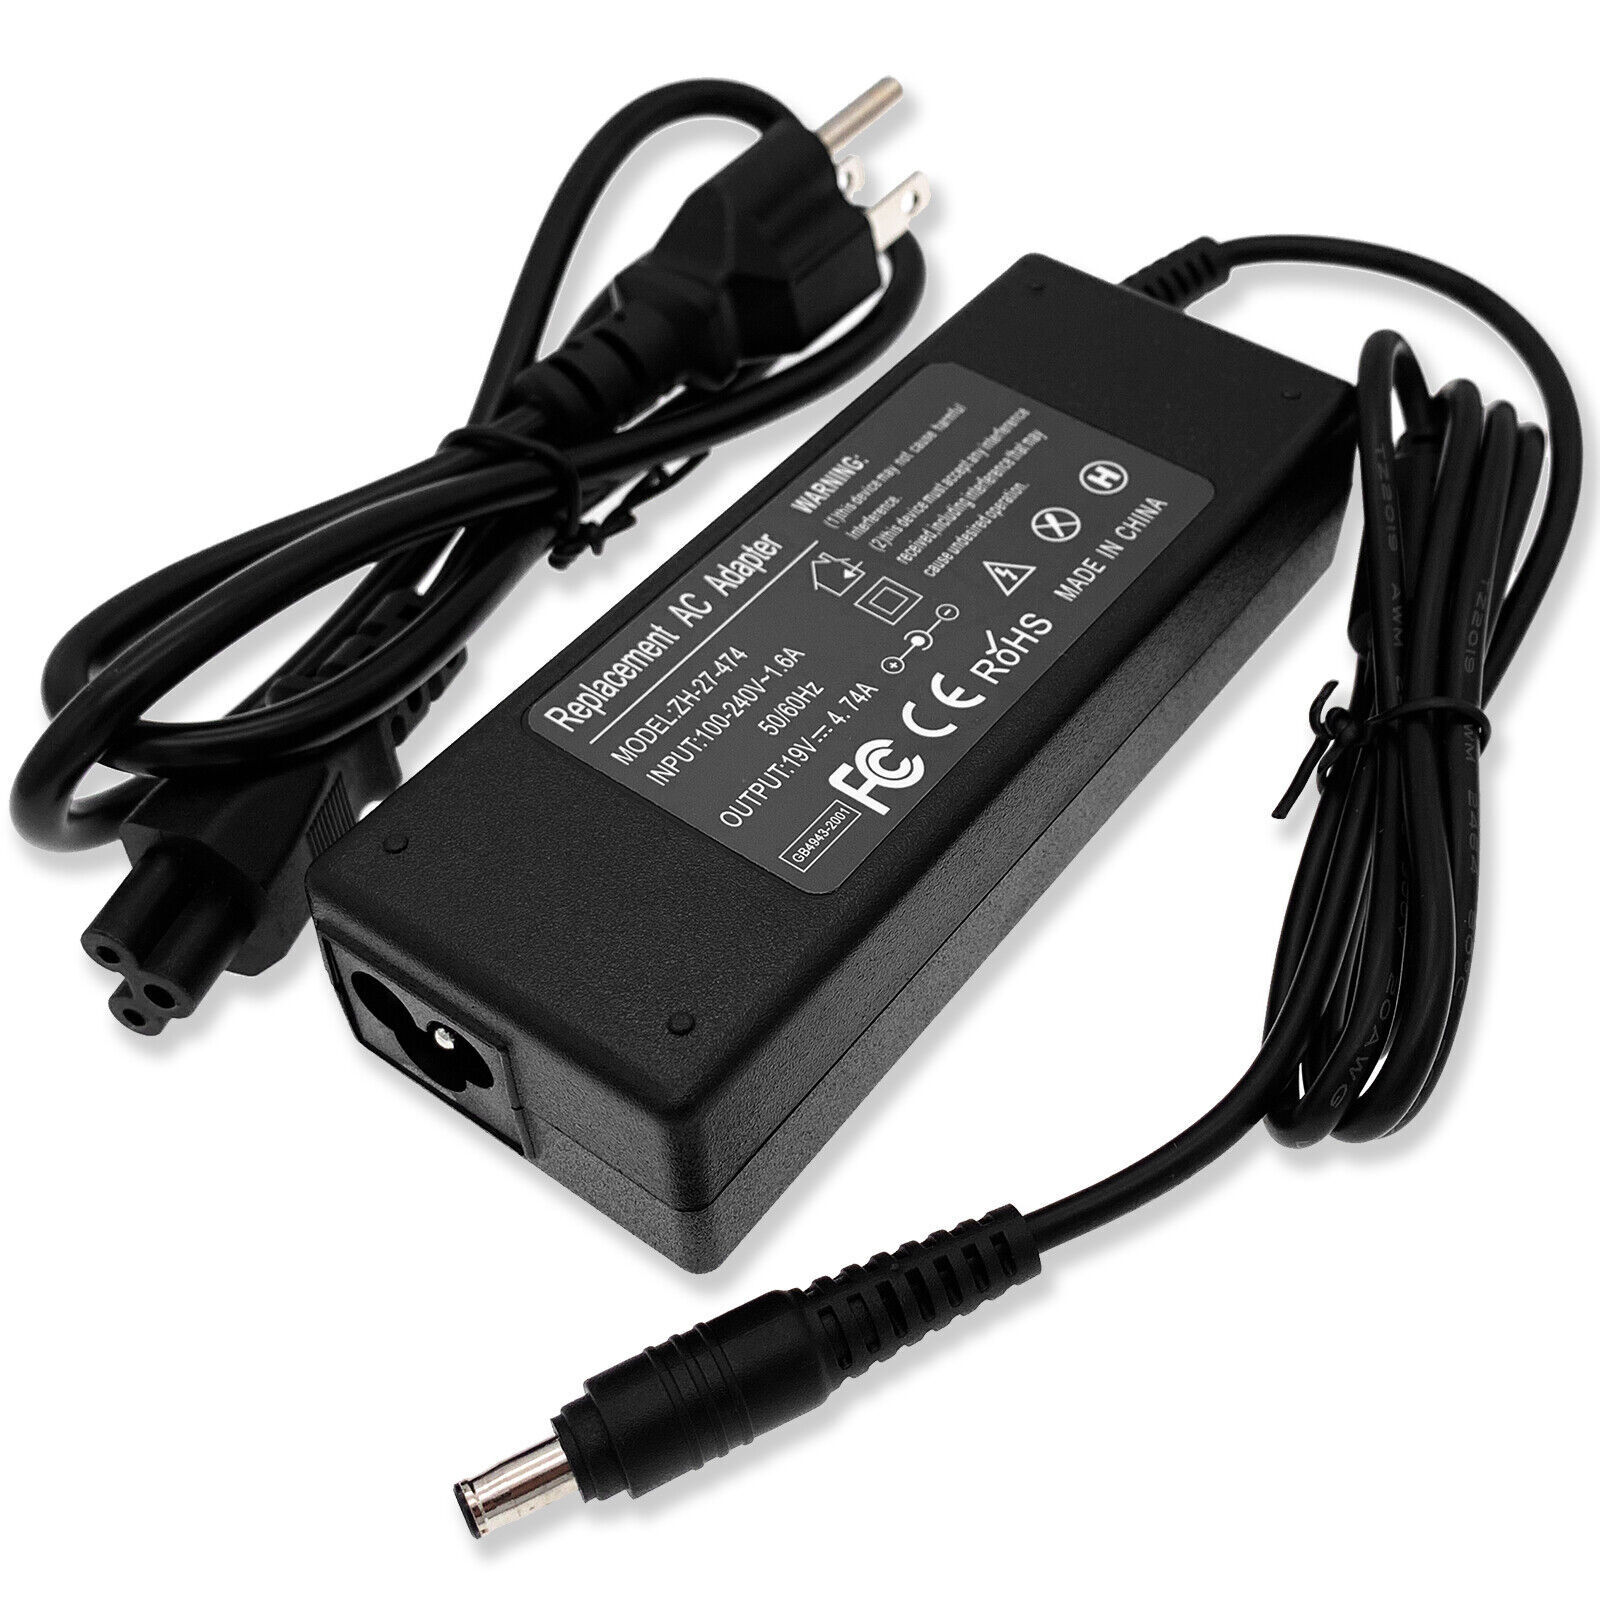 AC Adapter For Samsung Series 7 ZH-27-474 All-in-One PC 90W Power Supply Cord